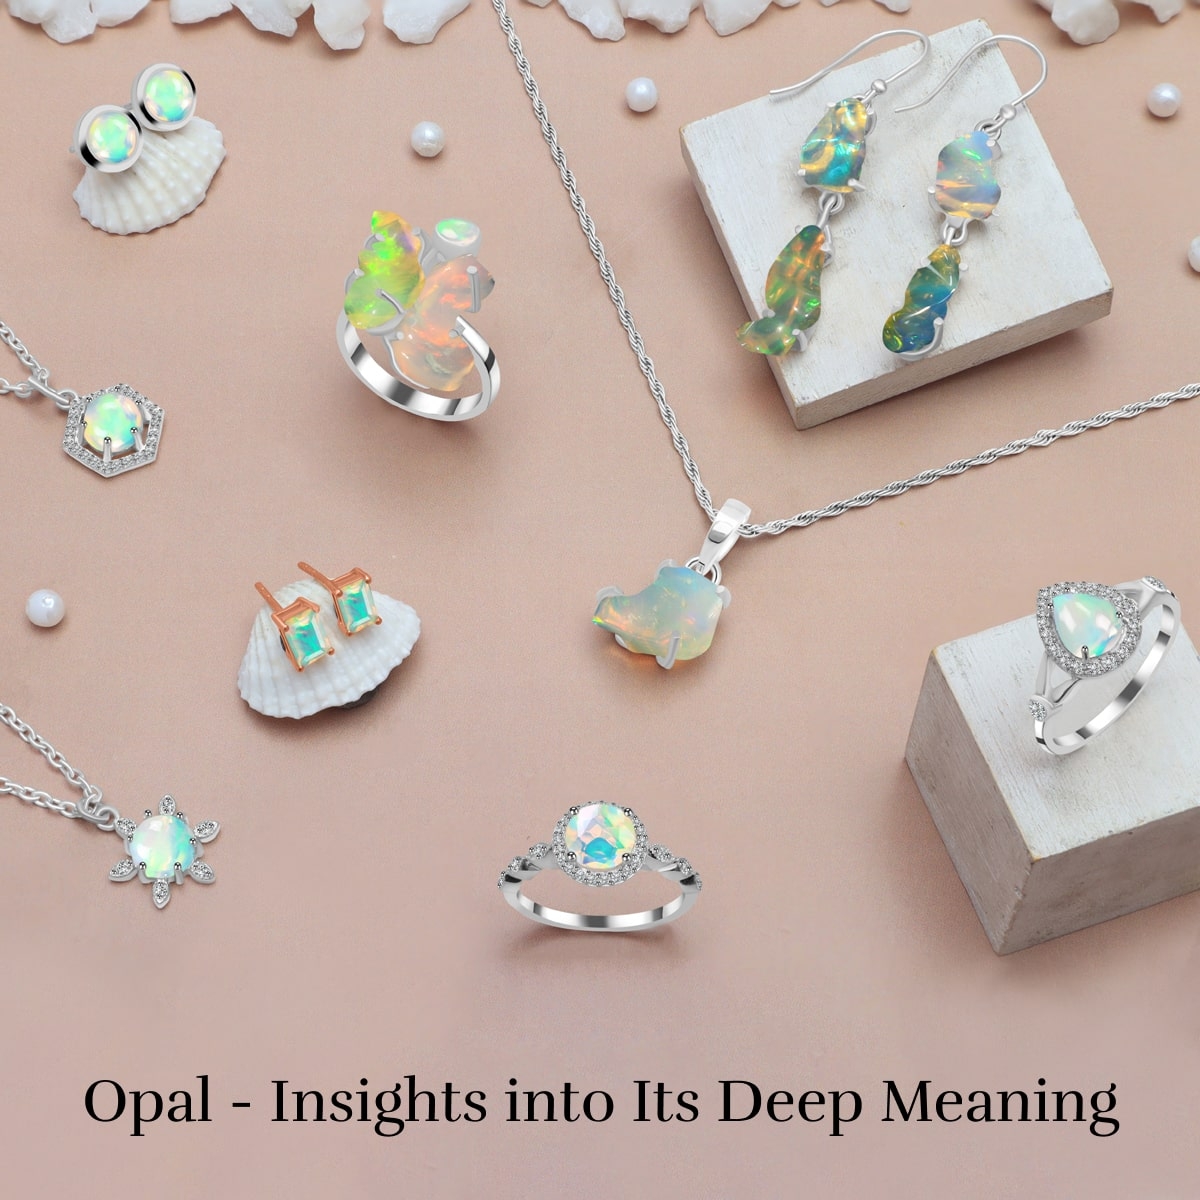 Meaning of Opal